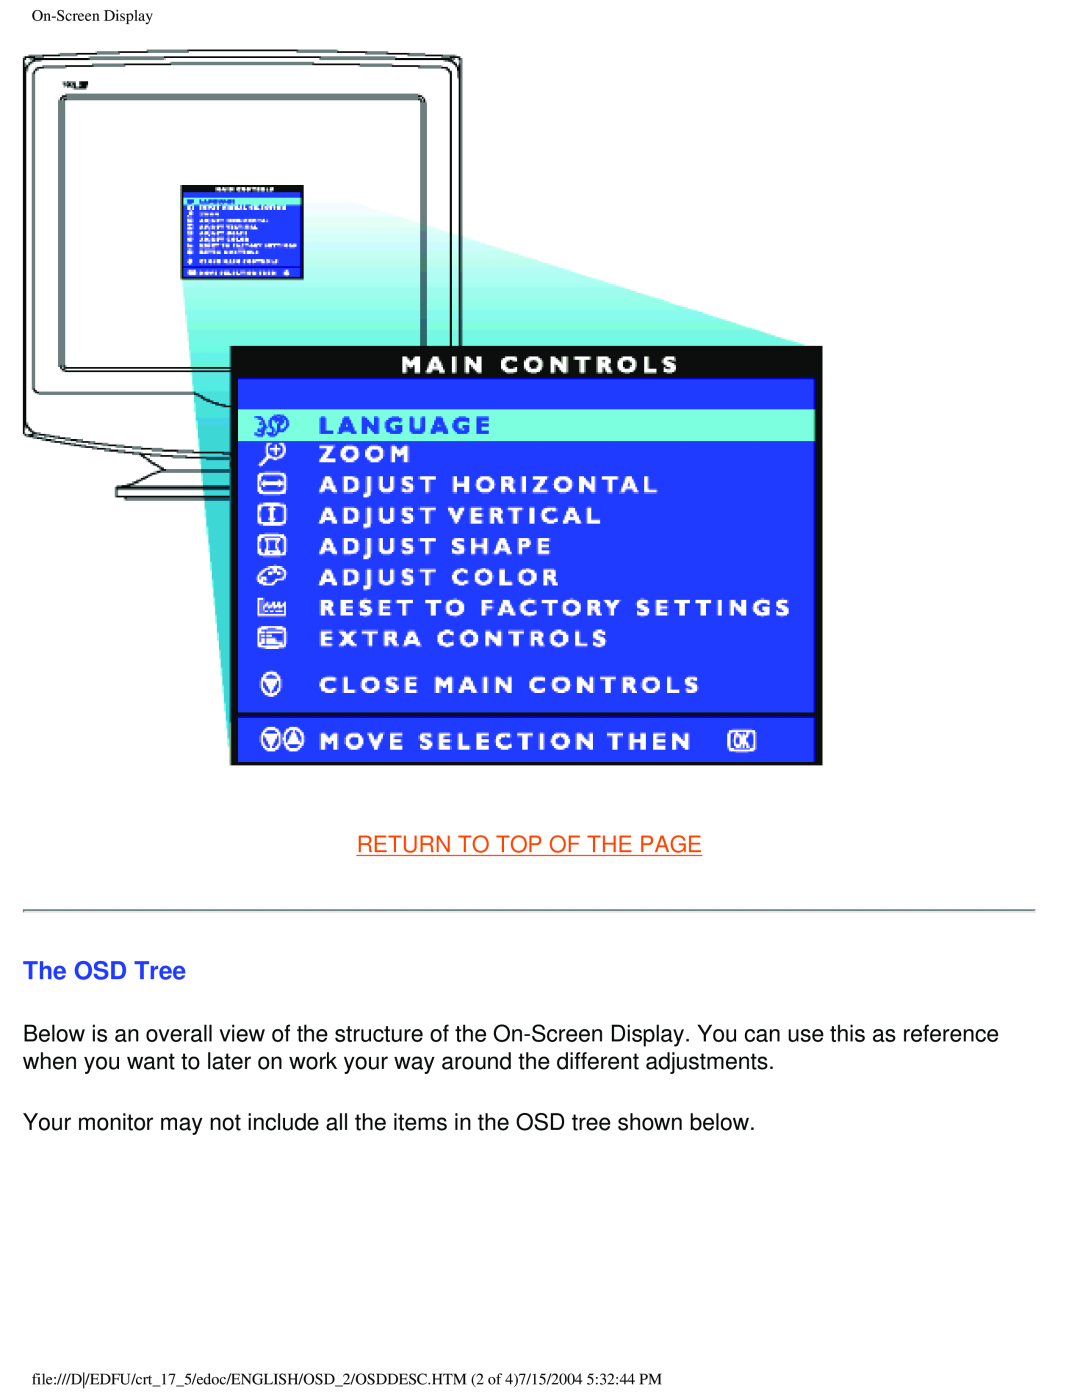 Philips 107F5, 109F5, 107S5, 107T5, 109B5, 107E5 user manual The OSD Tree, Return To Top Of The Page, On-ScreenDisplay 